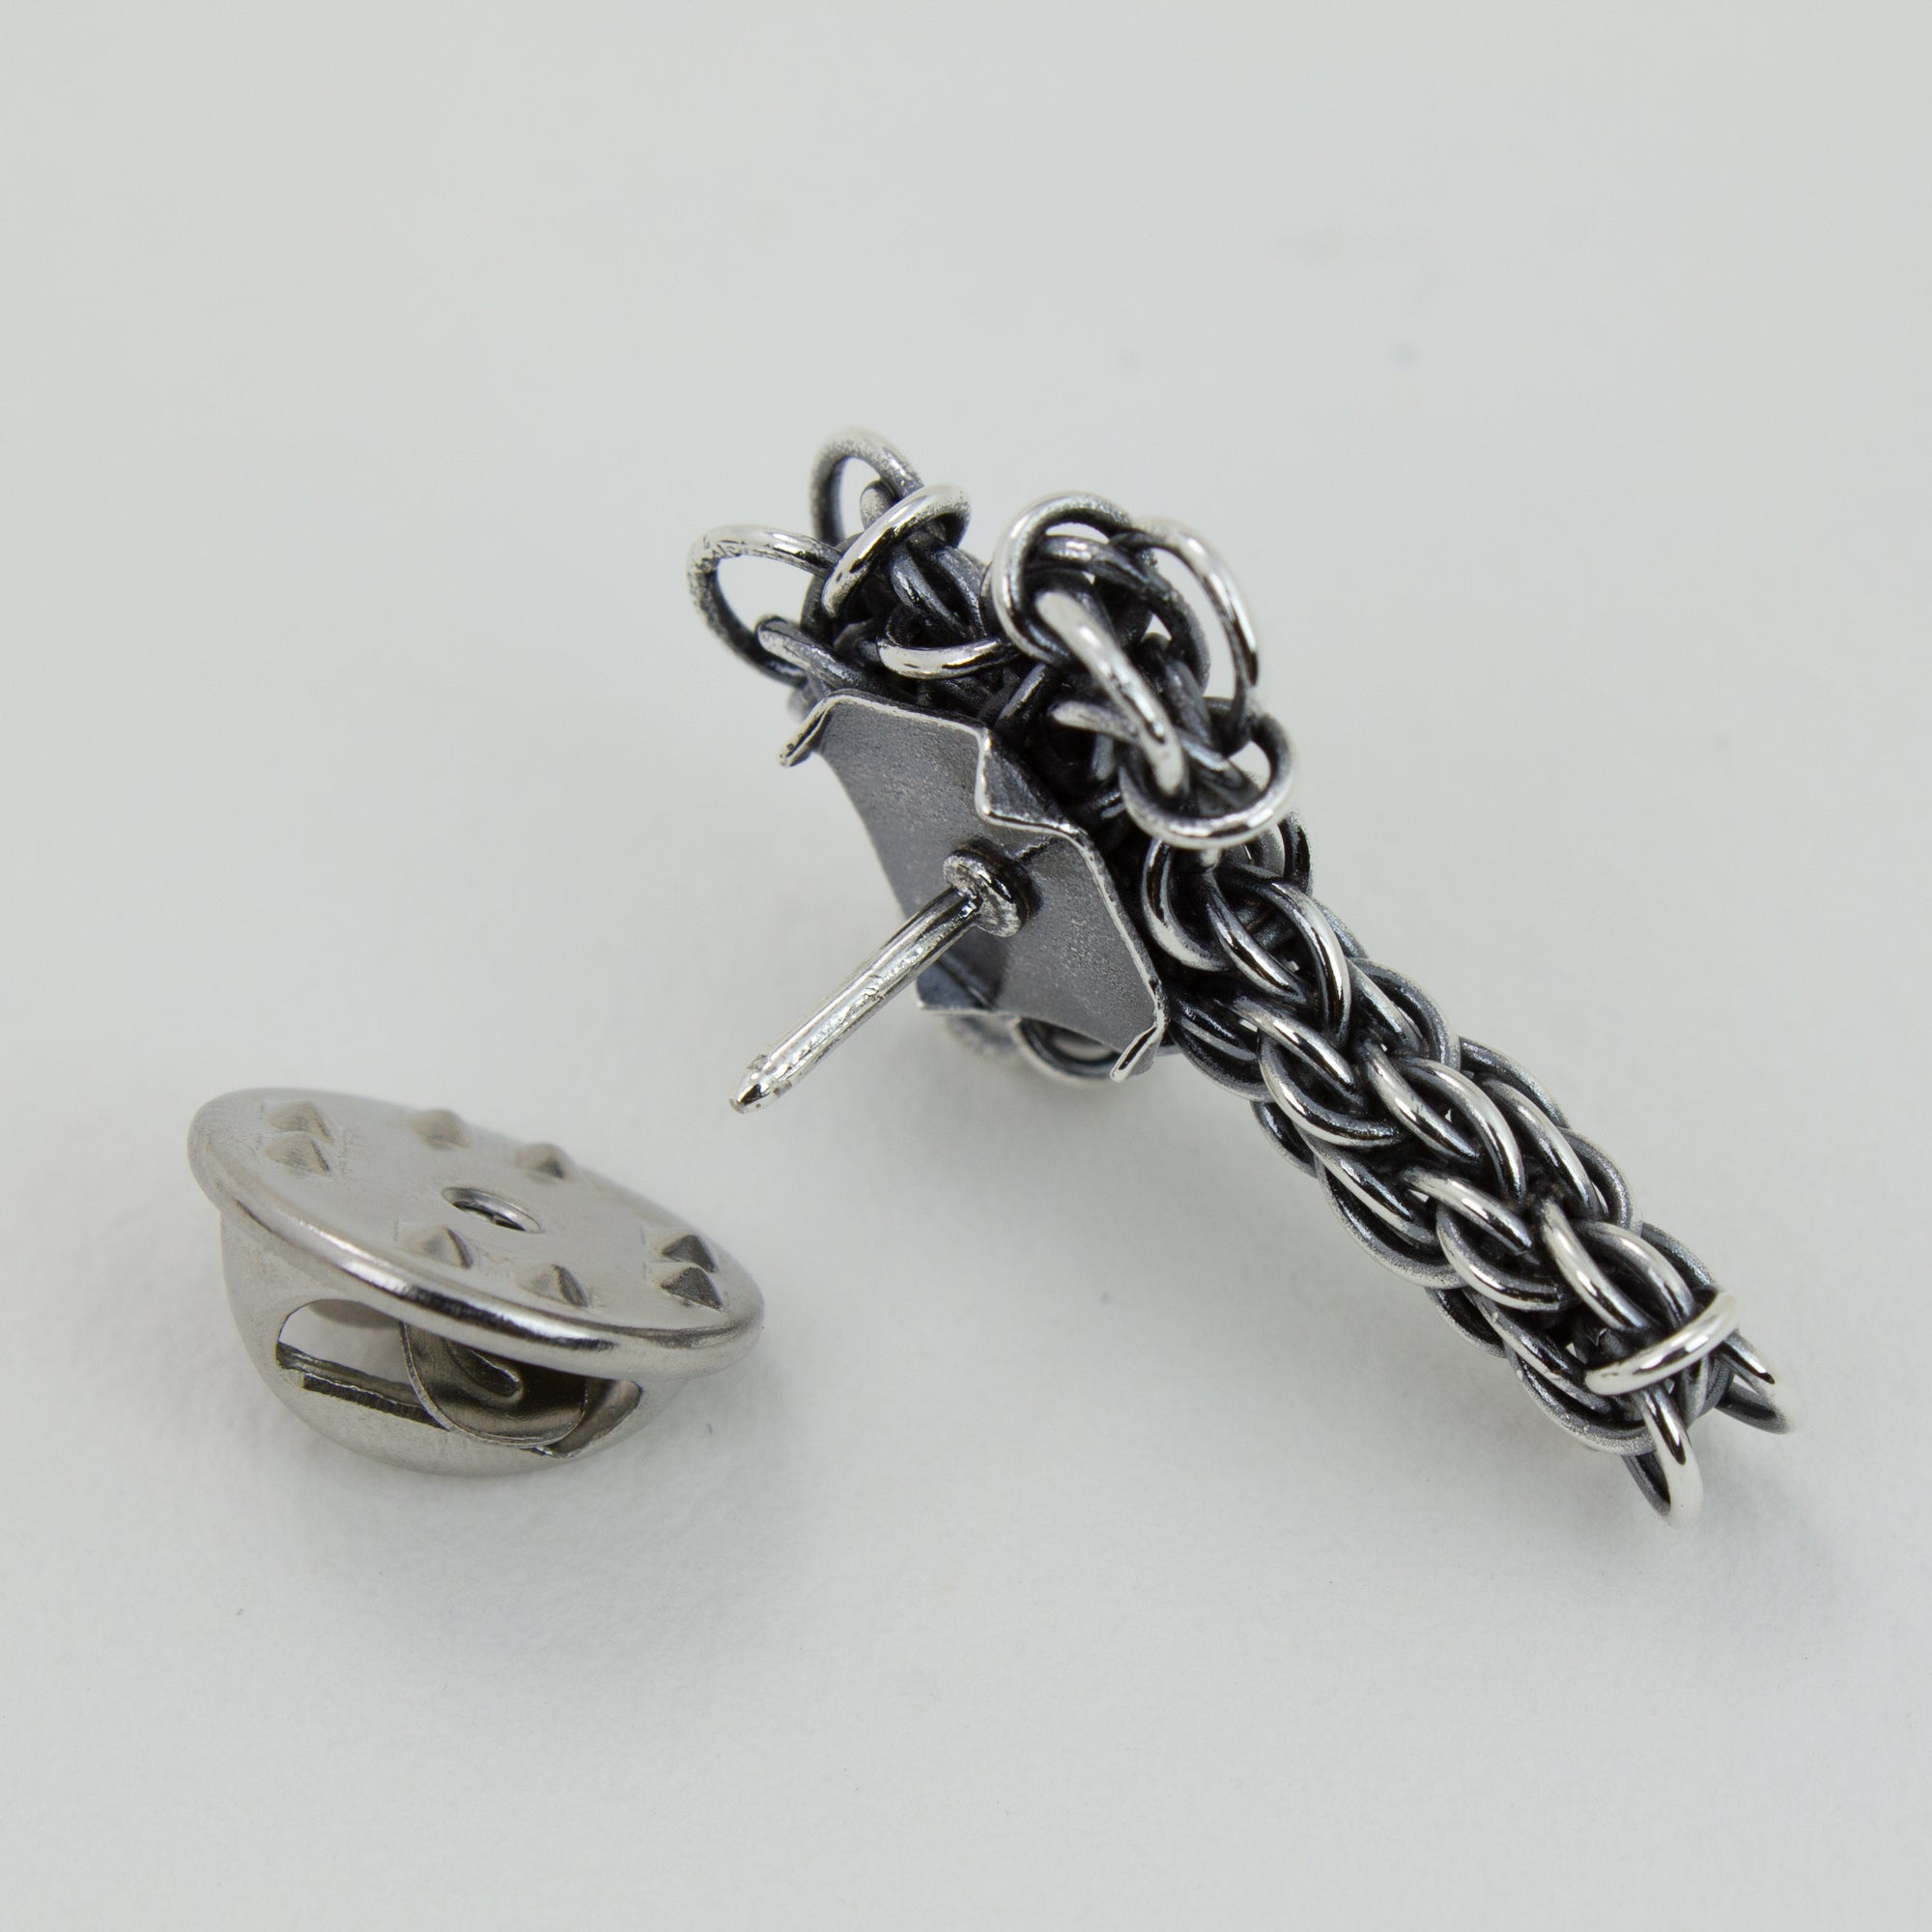 Fused Chainmaille Cross Lapel Pin / Brooch, Small - Femailler